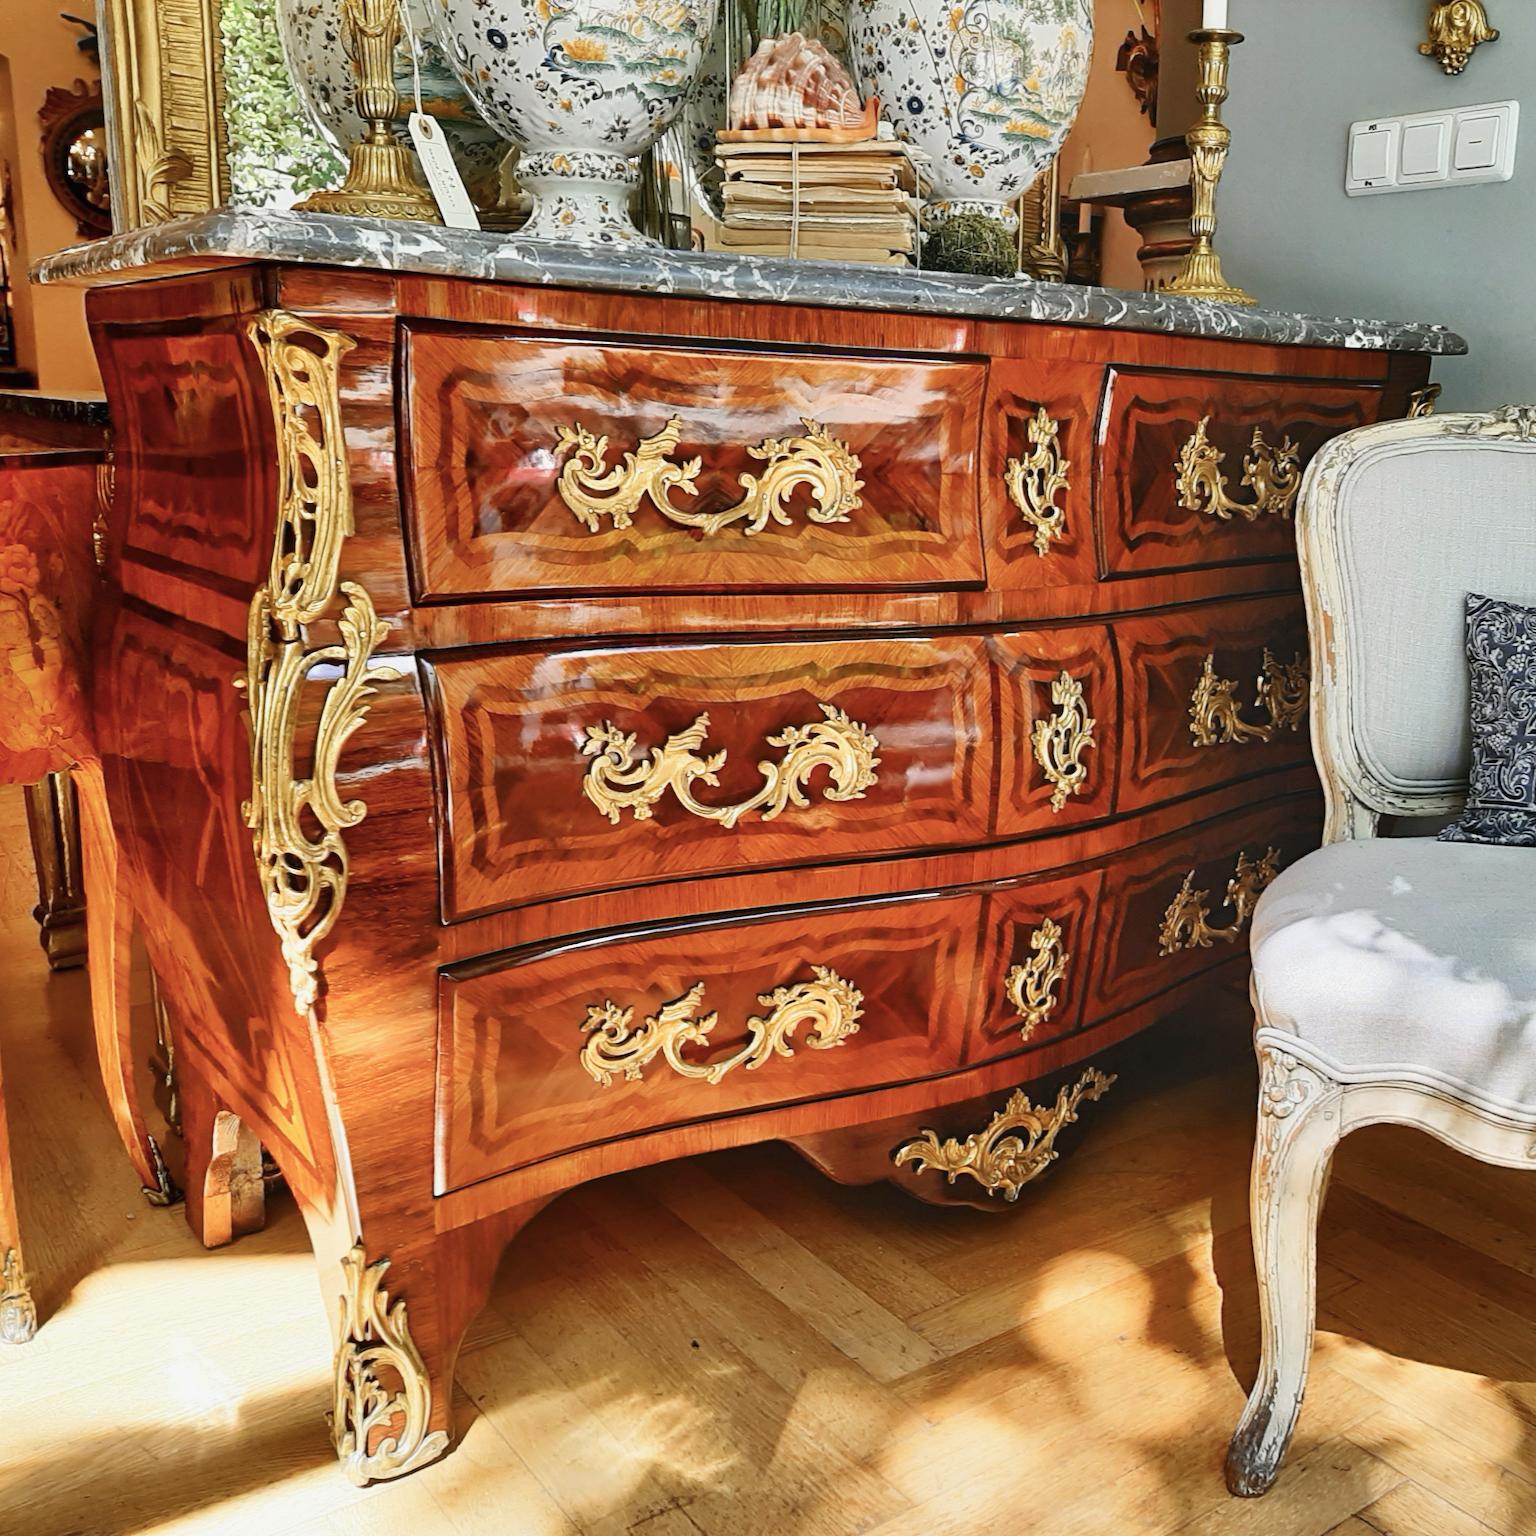 ! PLEASE NOTE: the French polish has recently been refreshed - the 2nd photo and following will give you the right impression of the surface - !
A Louis XV style marquetry commode or chest of drawers of tomb-shaped form, the serpentine top echoed by